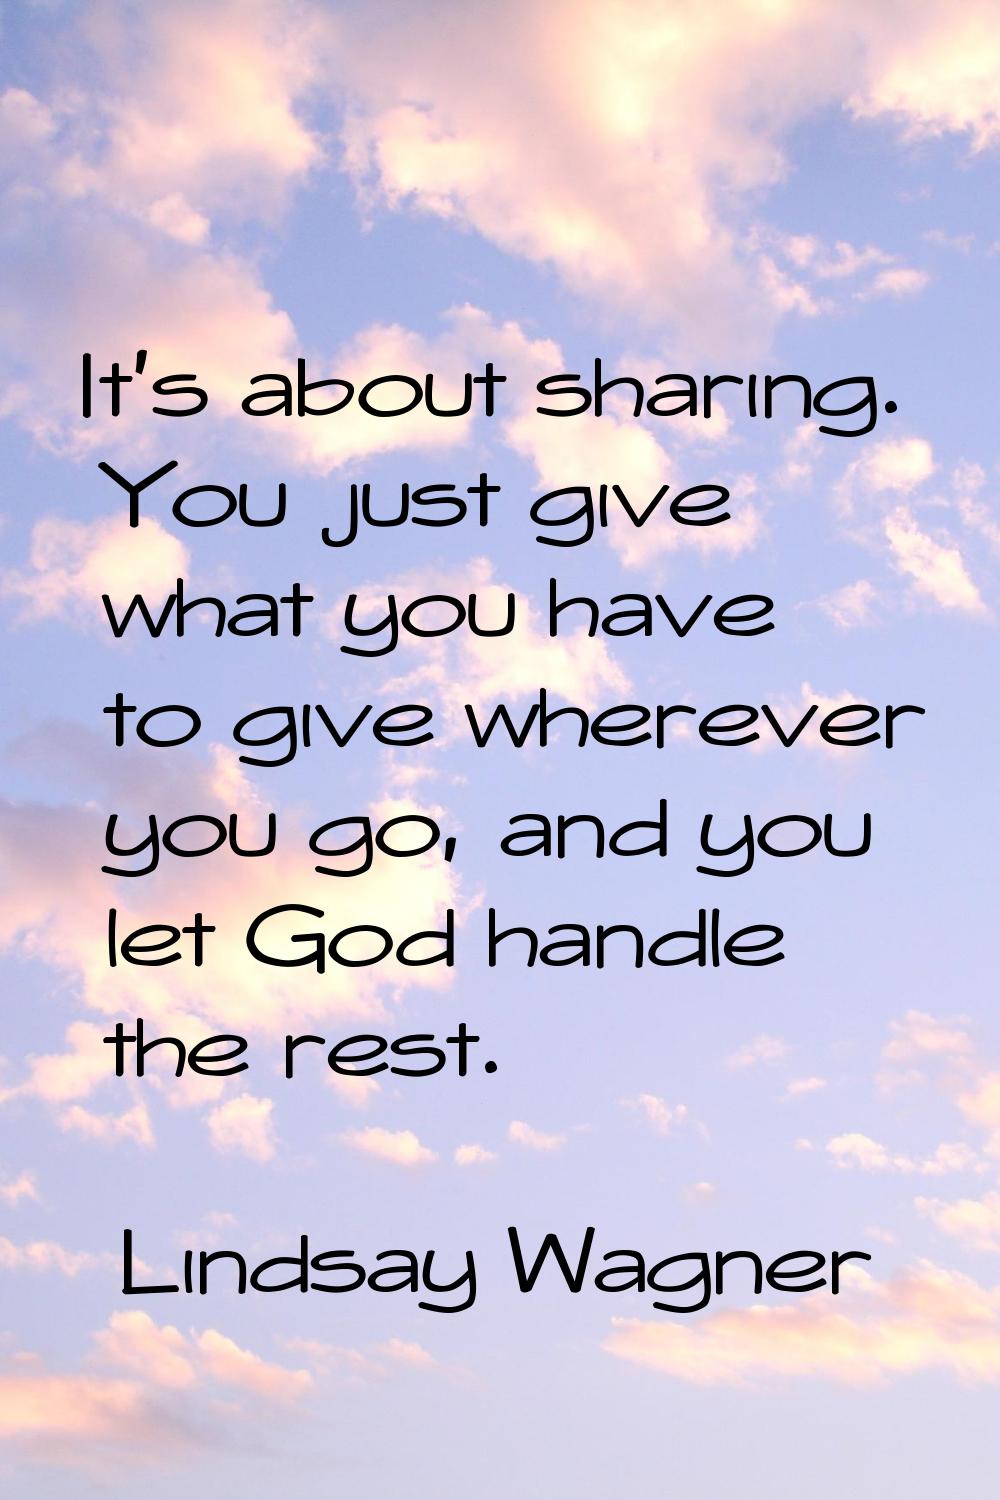 It's about sharing. You just give what you have to give wherever you go, and you let God handle the